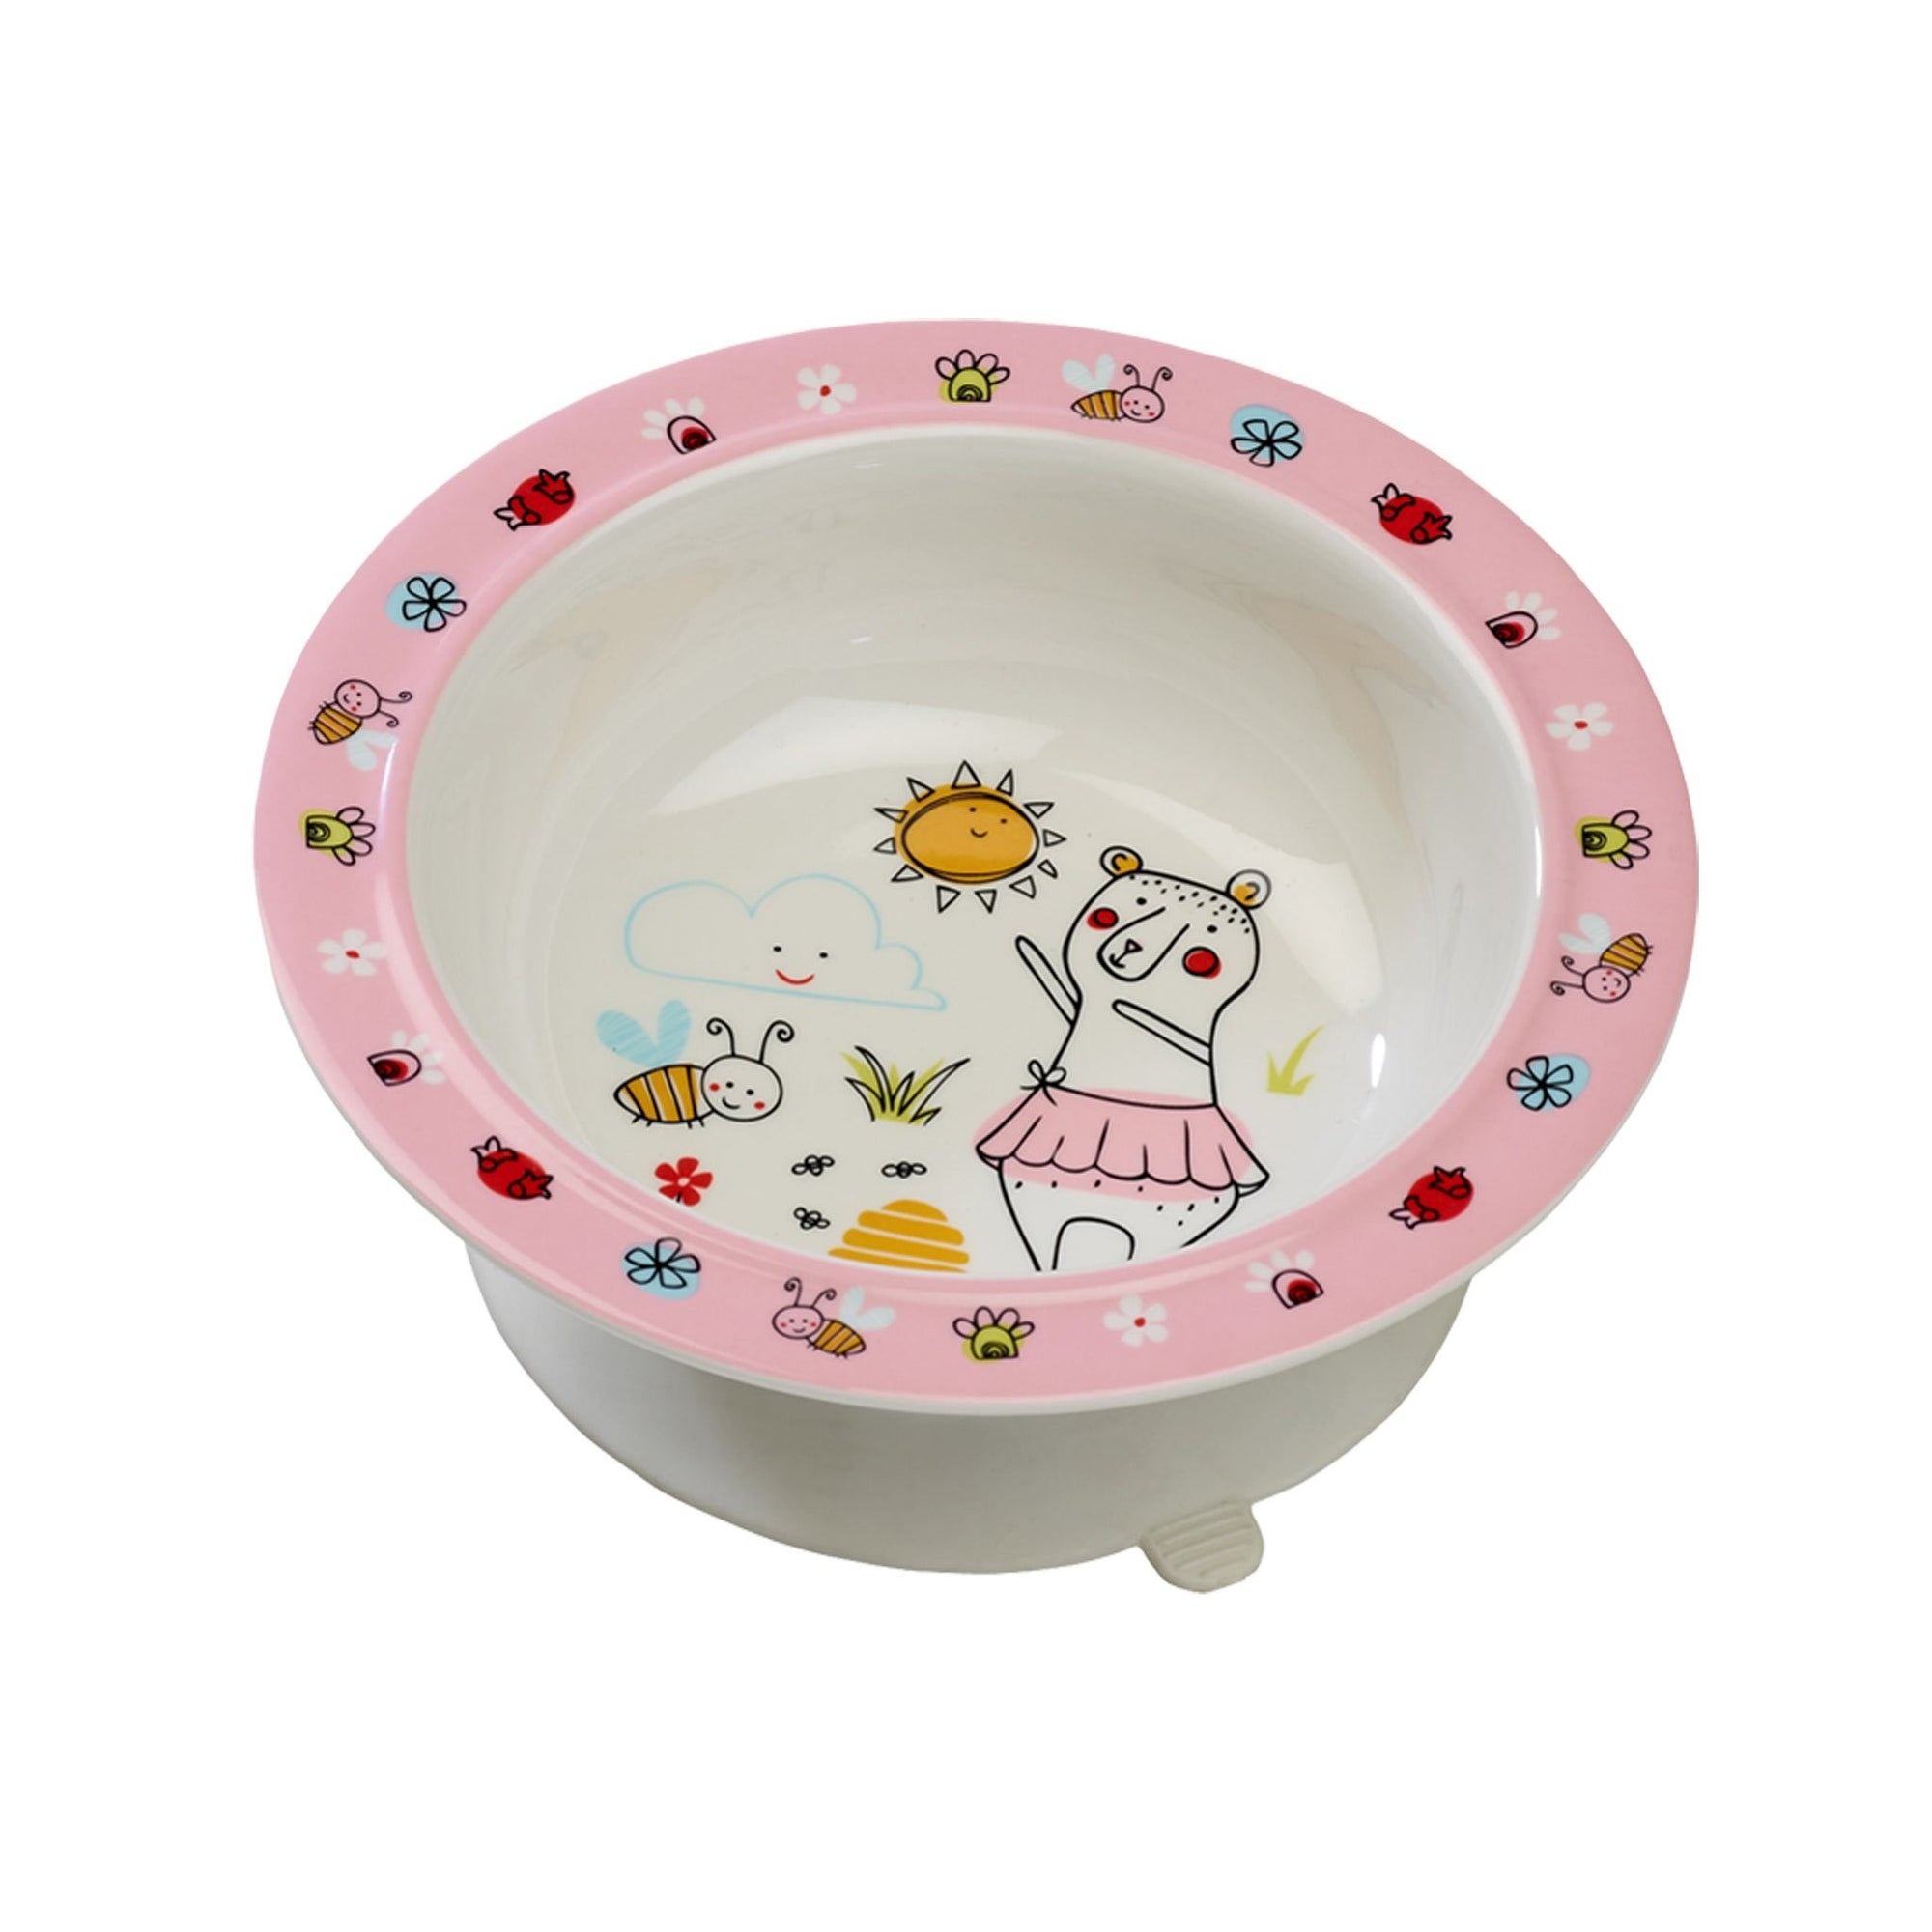 Sugar booger Spill Proof Melamine Suction Baby Plate